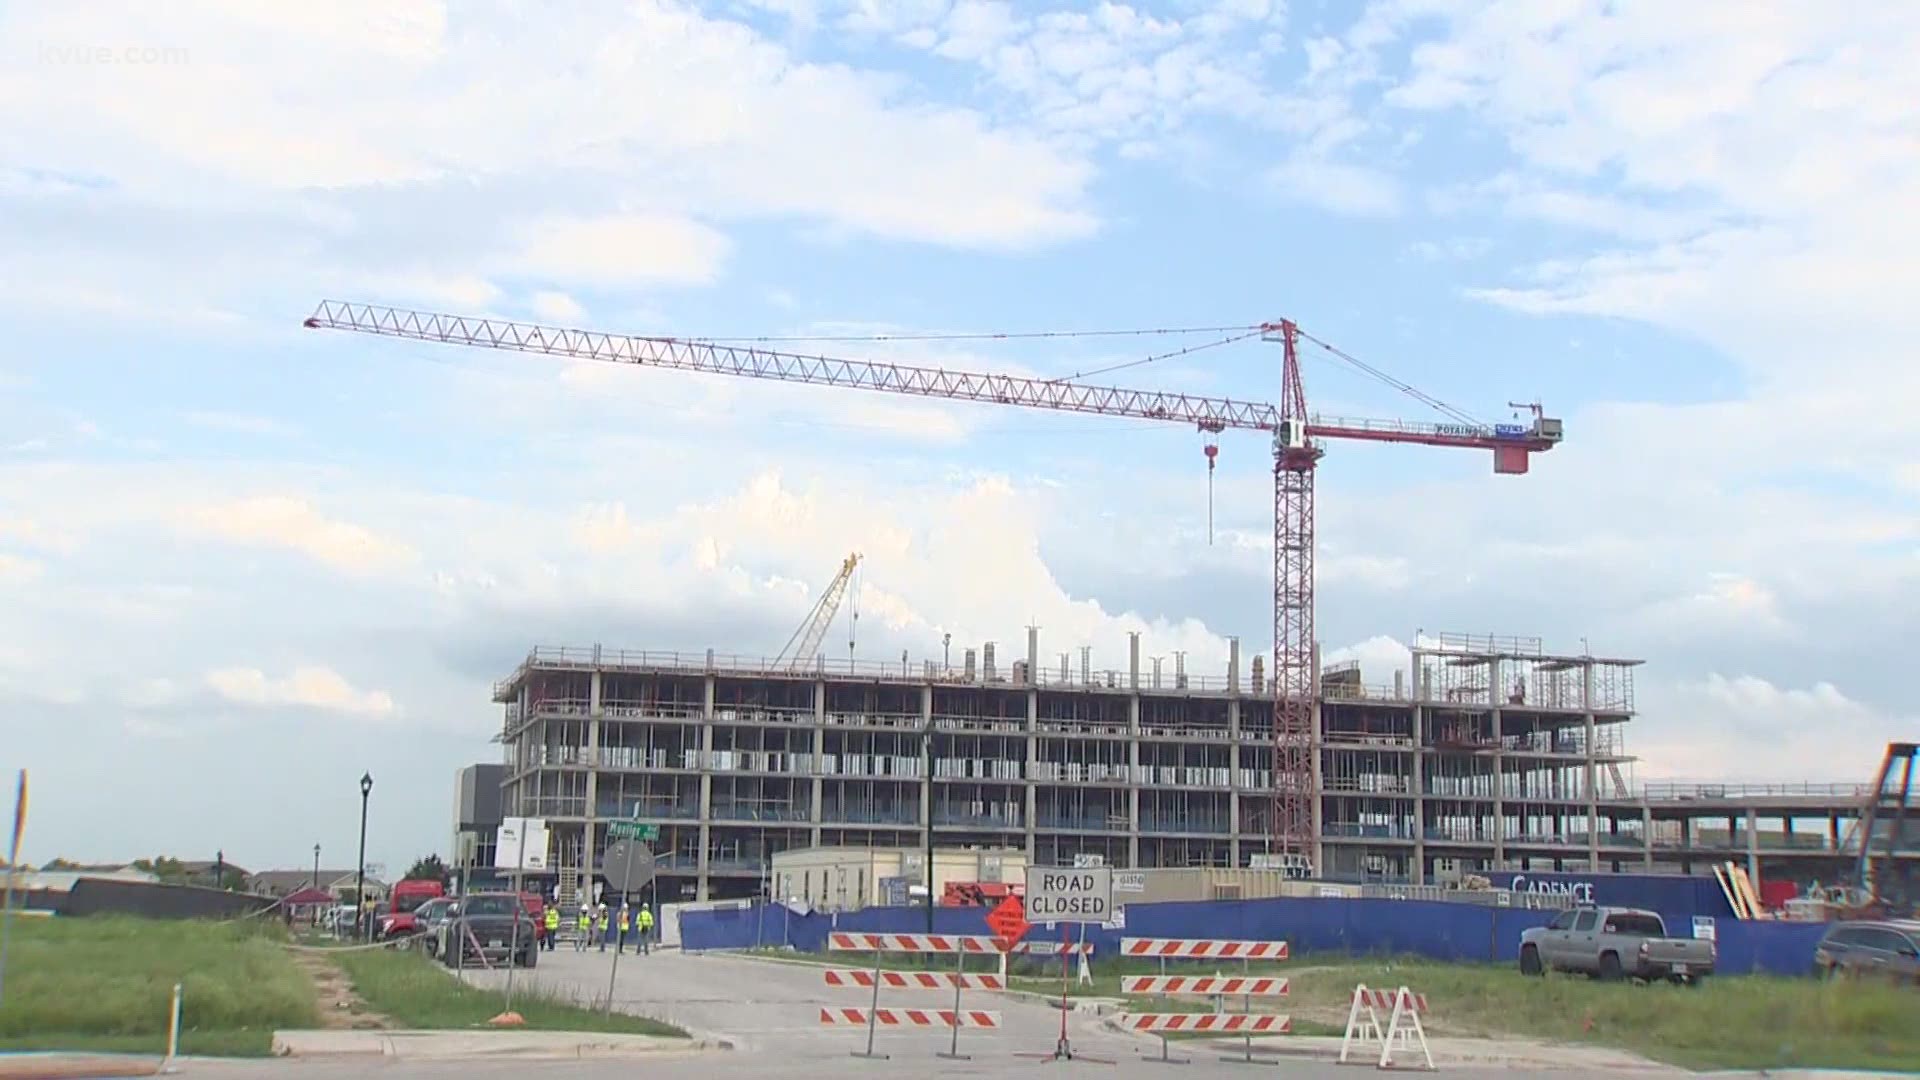 Twenty-two people were hurt Wednesday morning after two cranes crashed into each other at a construction site. Luis de Leon has the details.